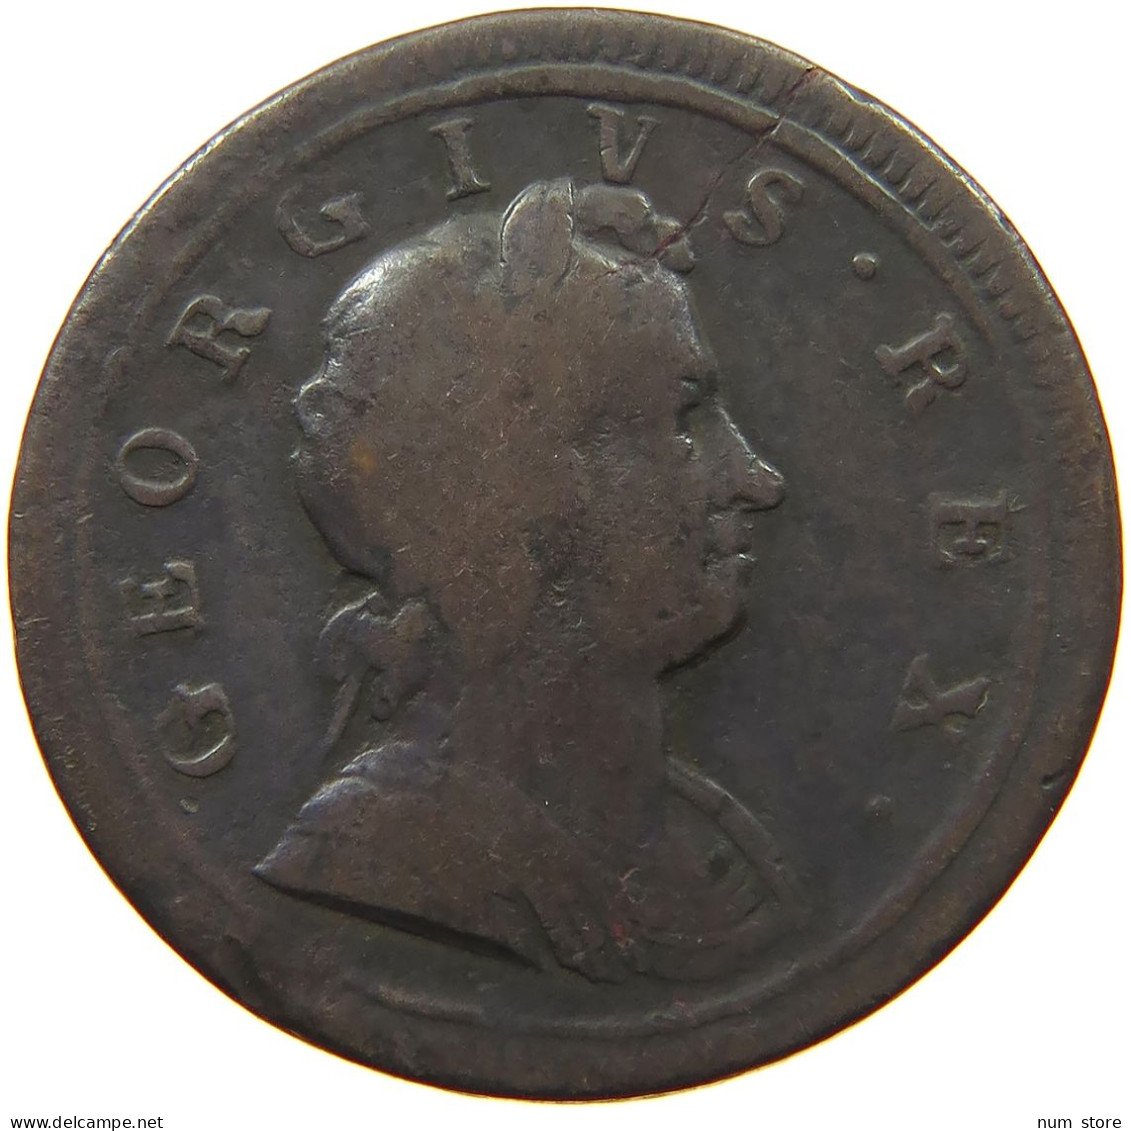 GREAT BRITAIN HALFPENNY 1724 George I. (1714-1727) #t149 0129 - B. 1/2 Penny